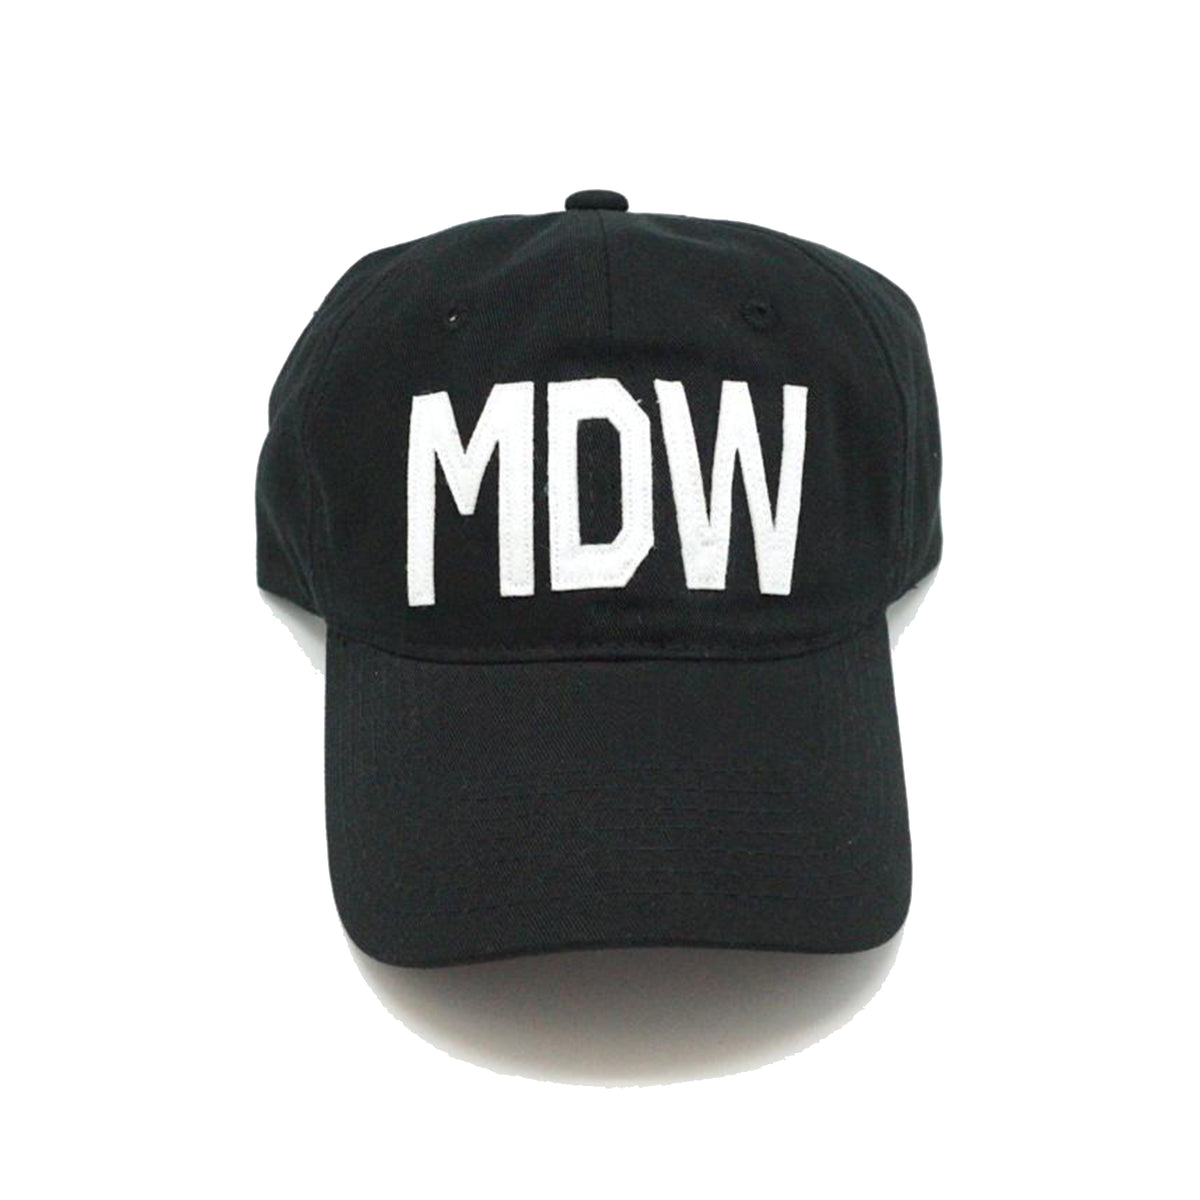 Black MDW Hat - All She Wrote